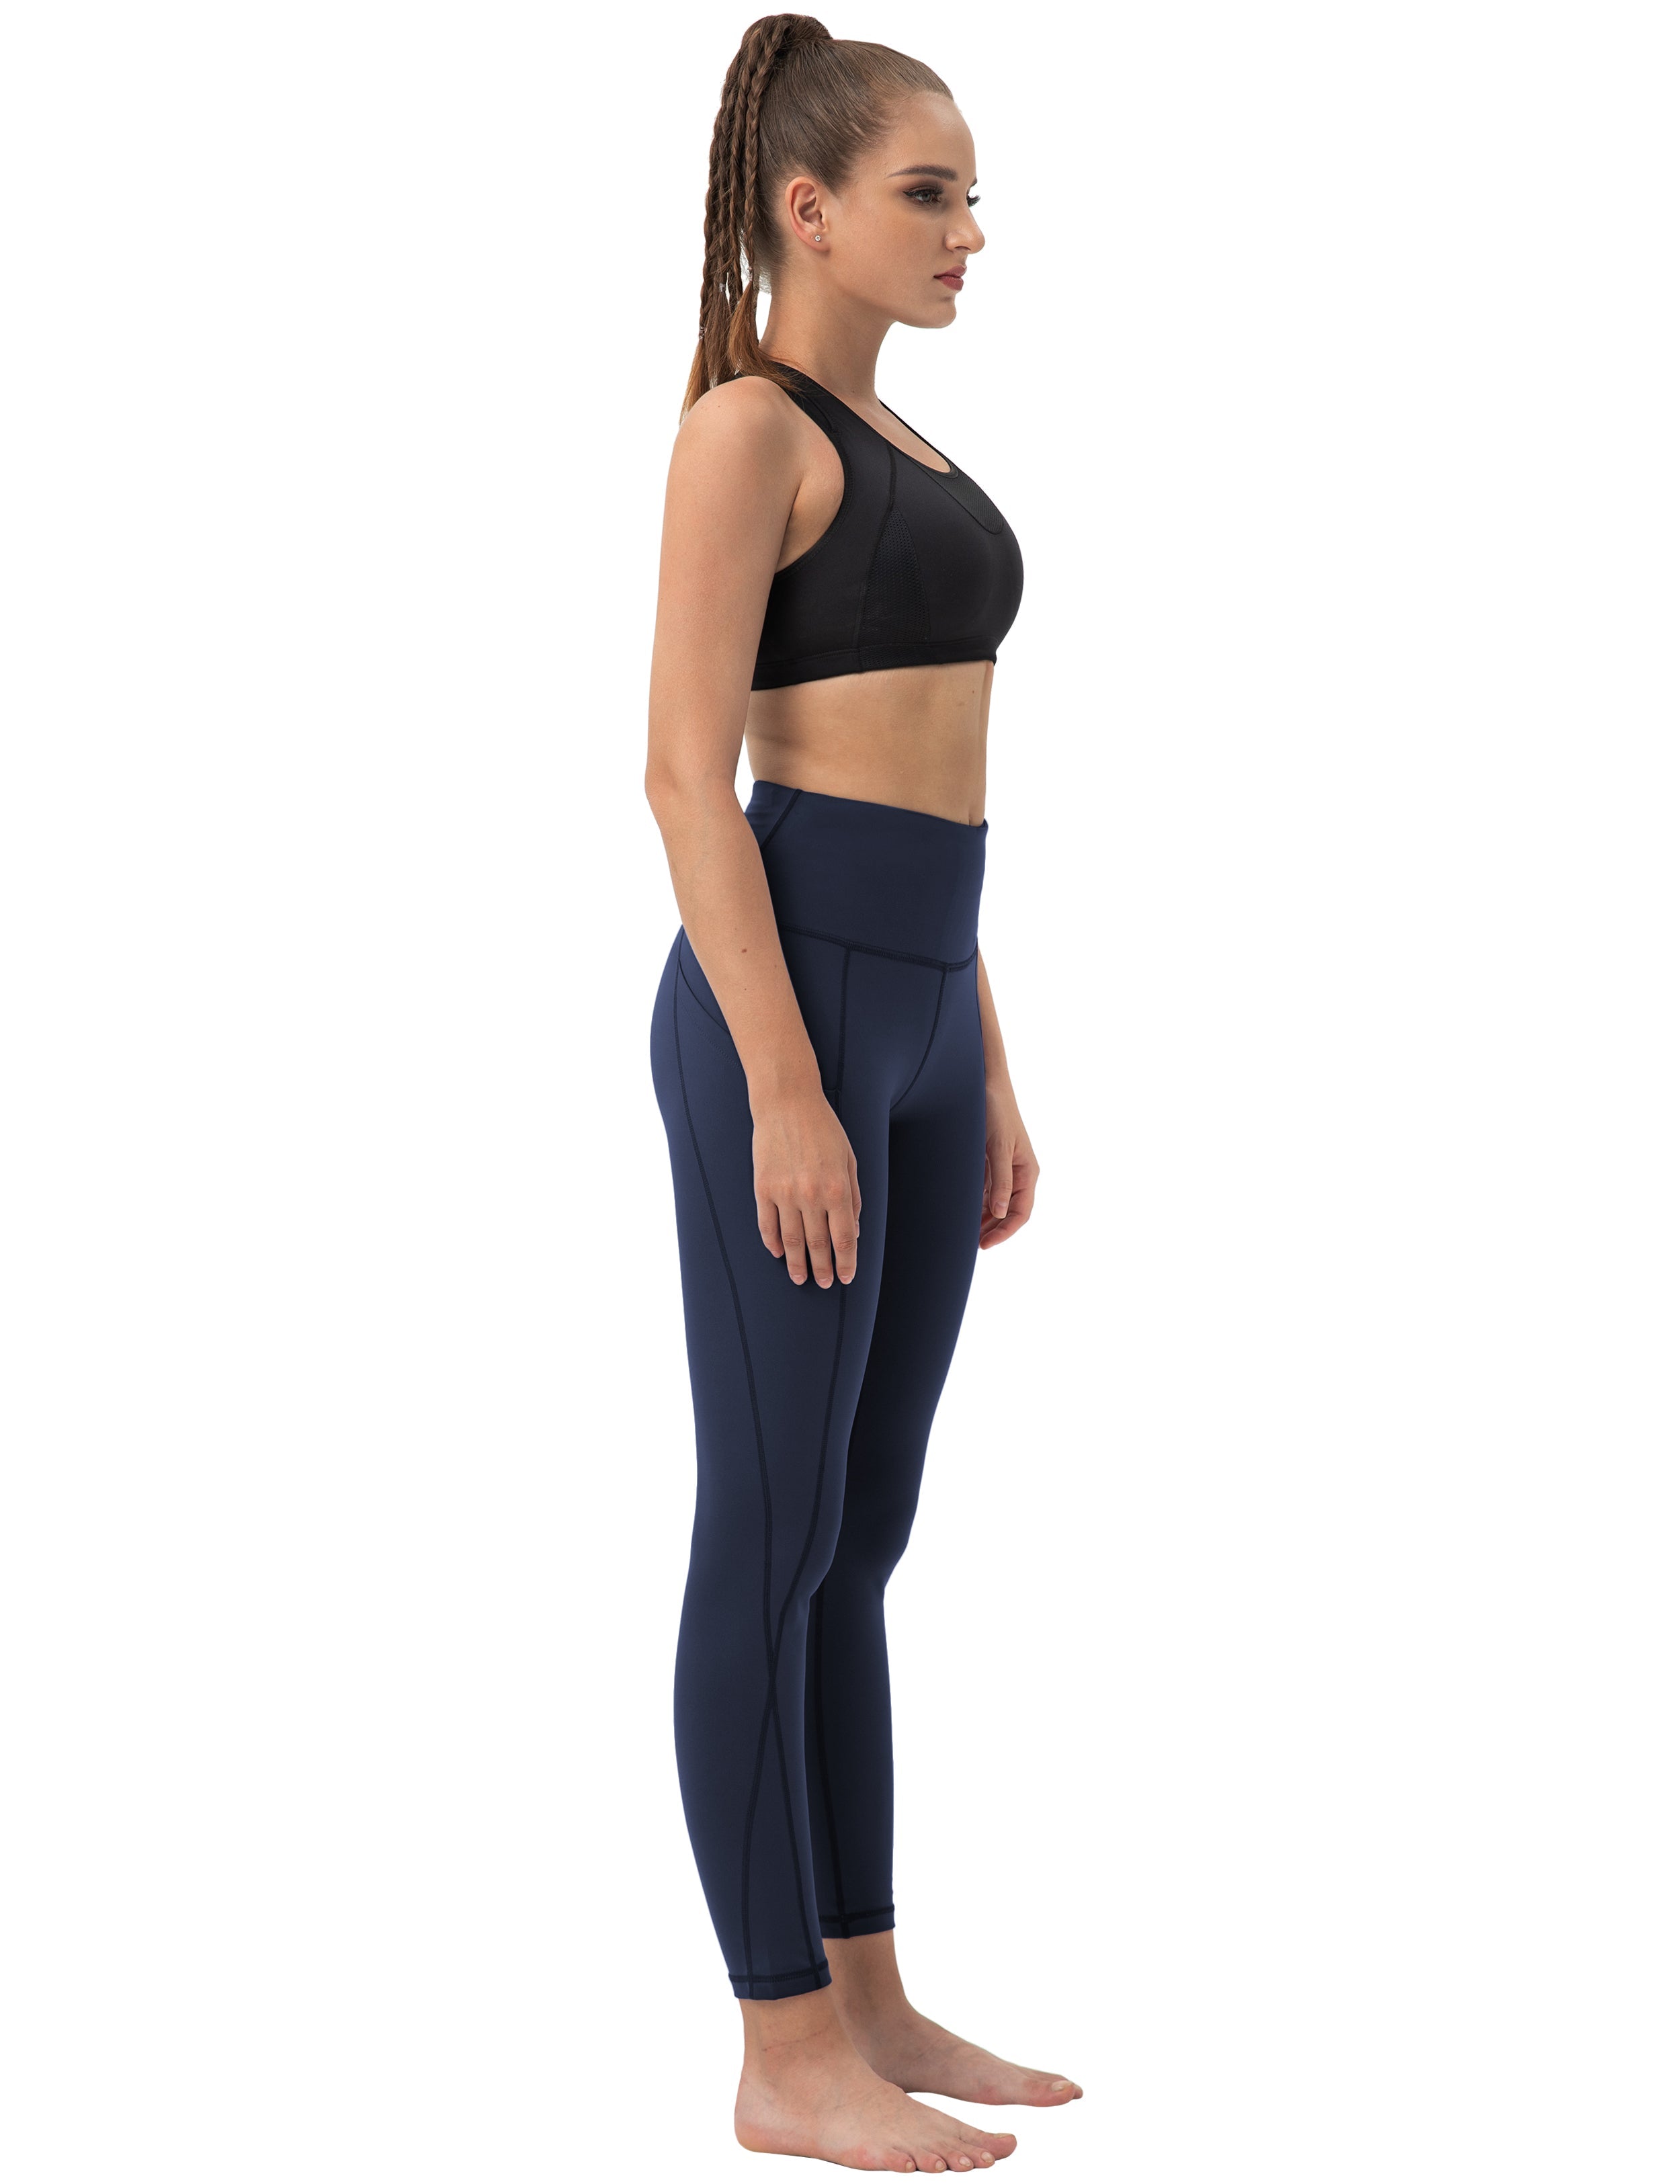 High Waist Side Pockets Running Pants darknavy 75% Nylon, 25% Spandex Fabric doesn't attract lint easily 4-way stretch No see-through Moisture-wicking Tummy control Inner pocket